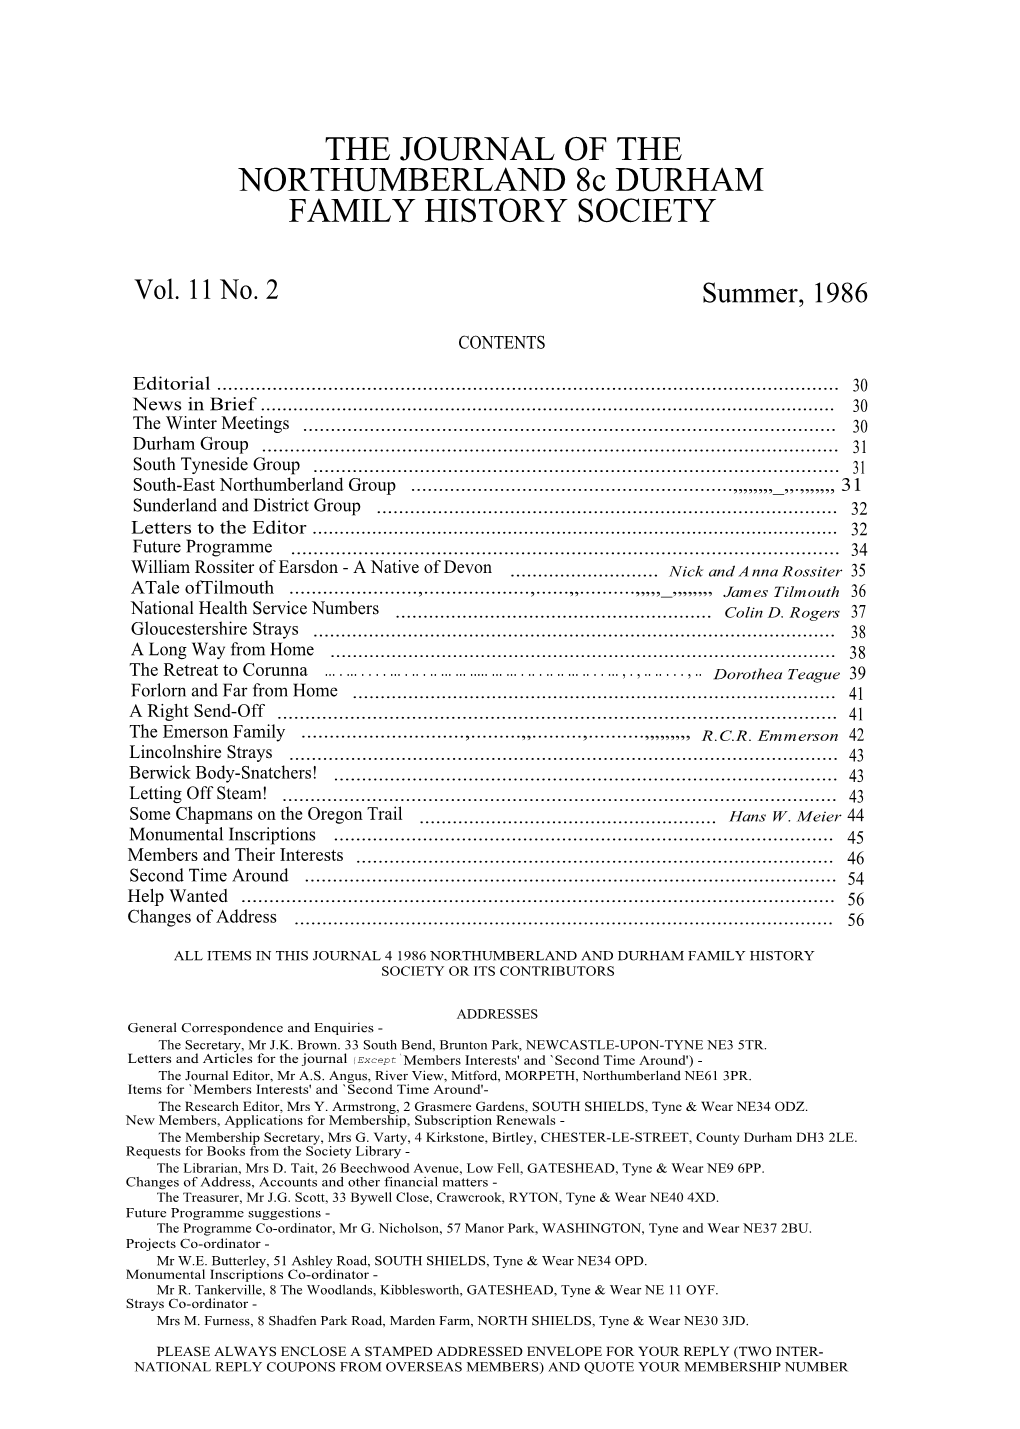 THE JOURNAL of the NORTHUMBERLAND 8C DURHAM FAMILY HISTORY SOCIETY